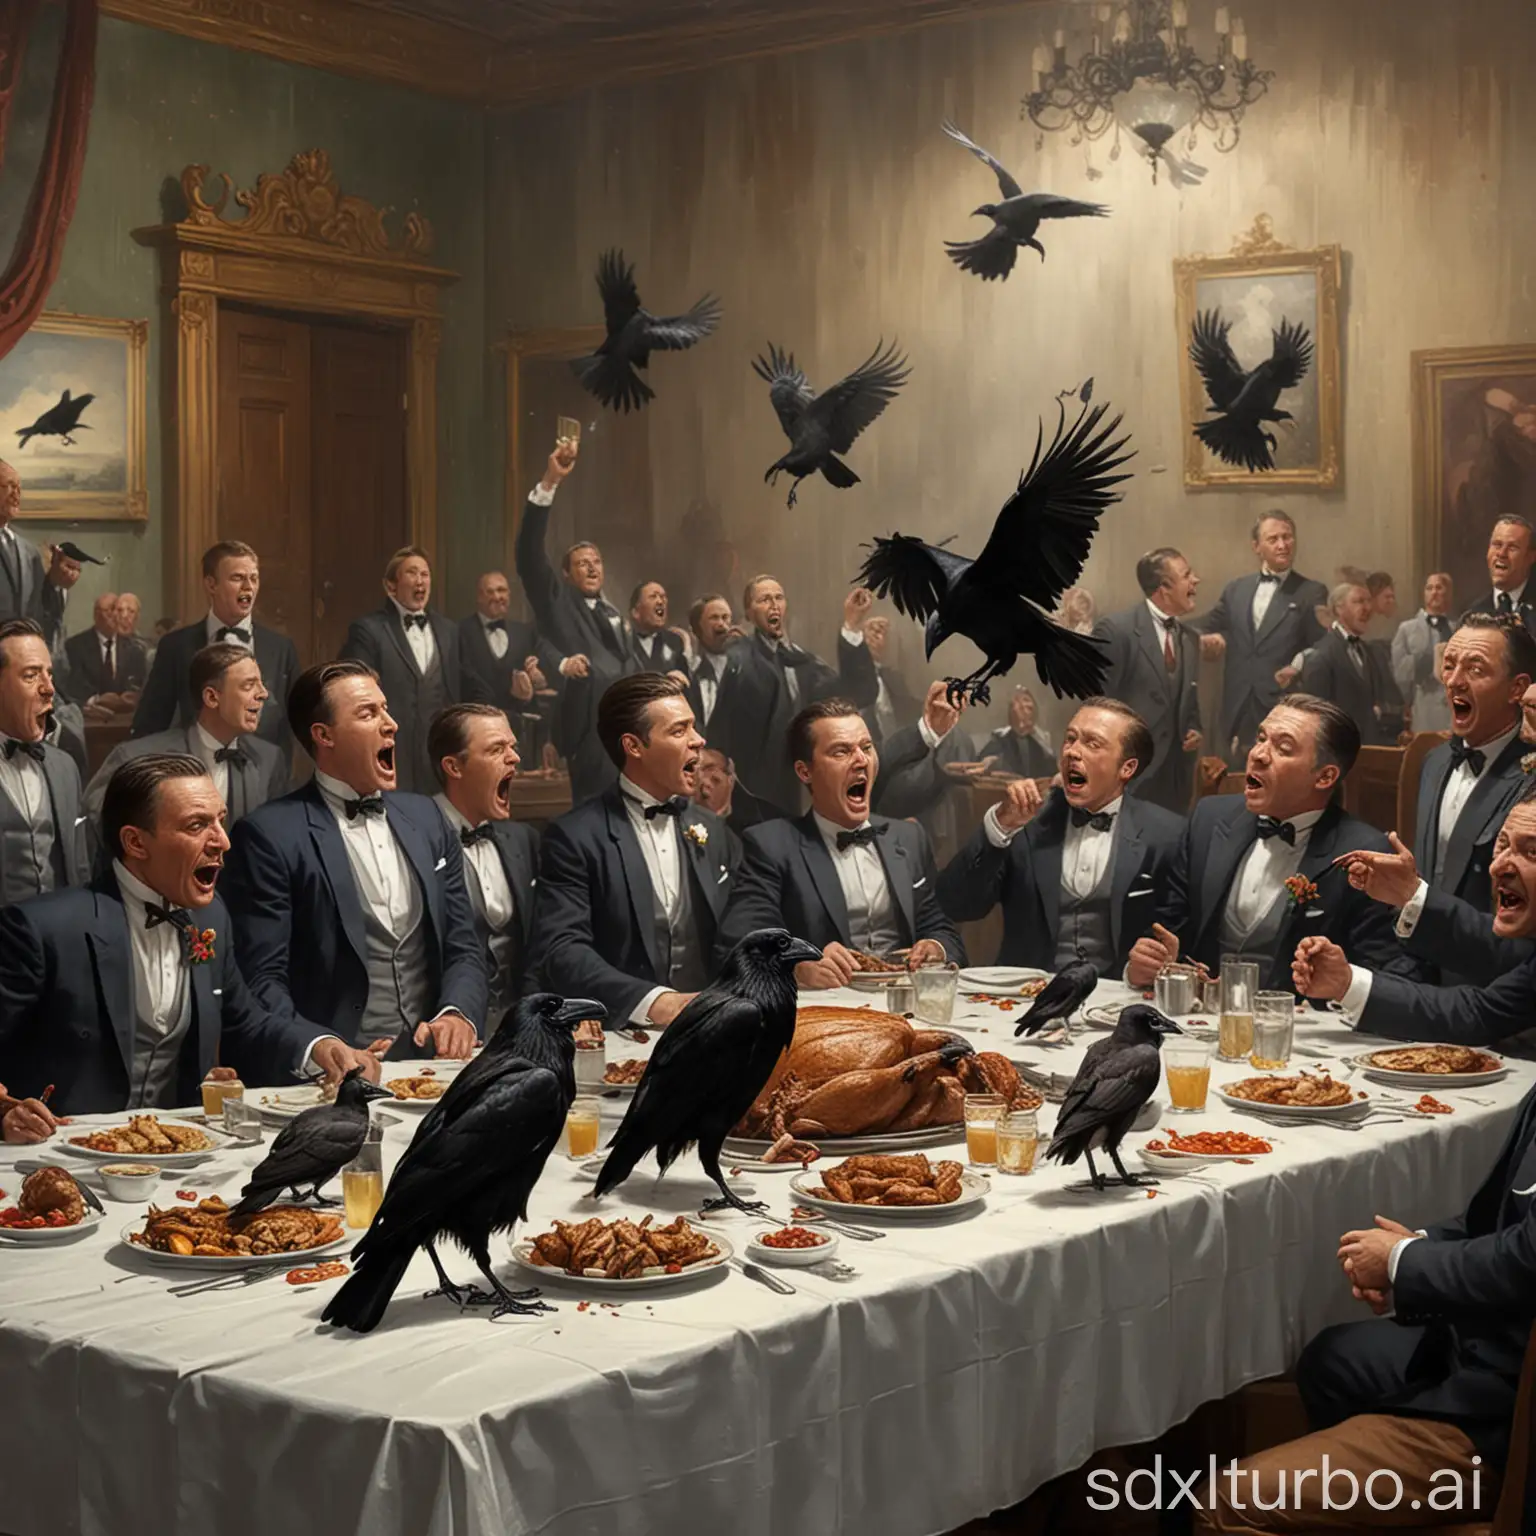 A crow sits on a set table and pecks at a large roast. Men in suits are sitting at the table, they shout at each other. Vultures fly above the scene.